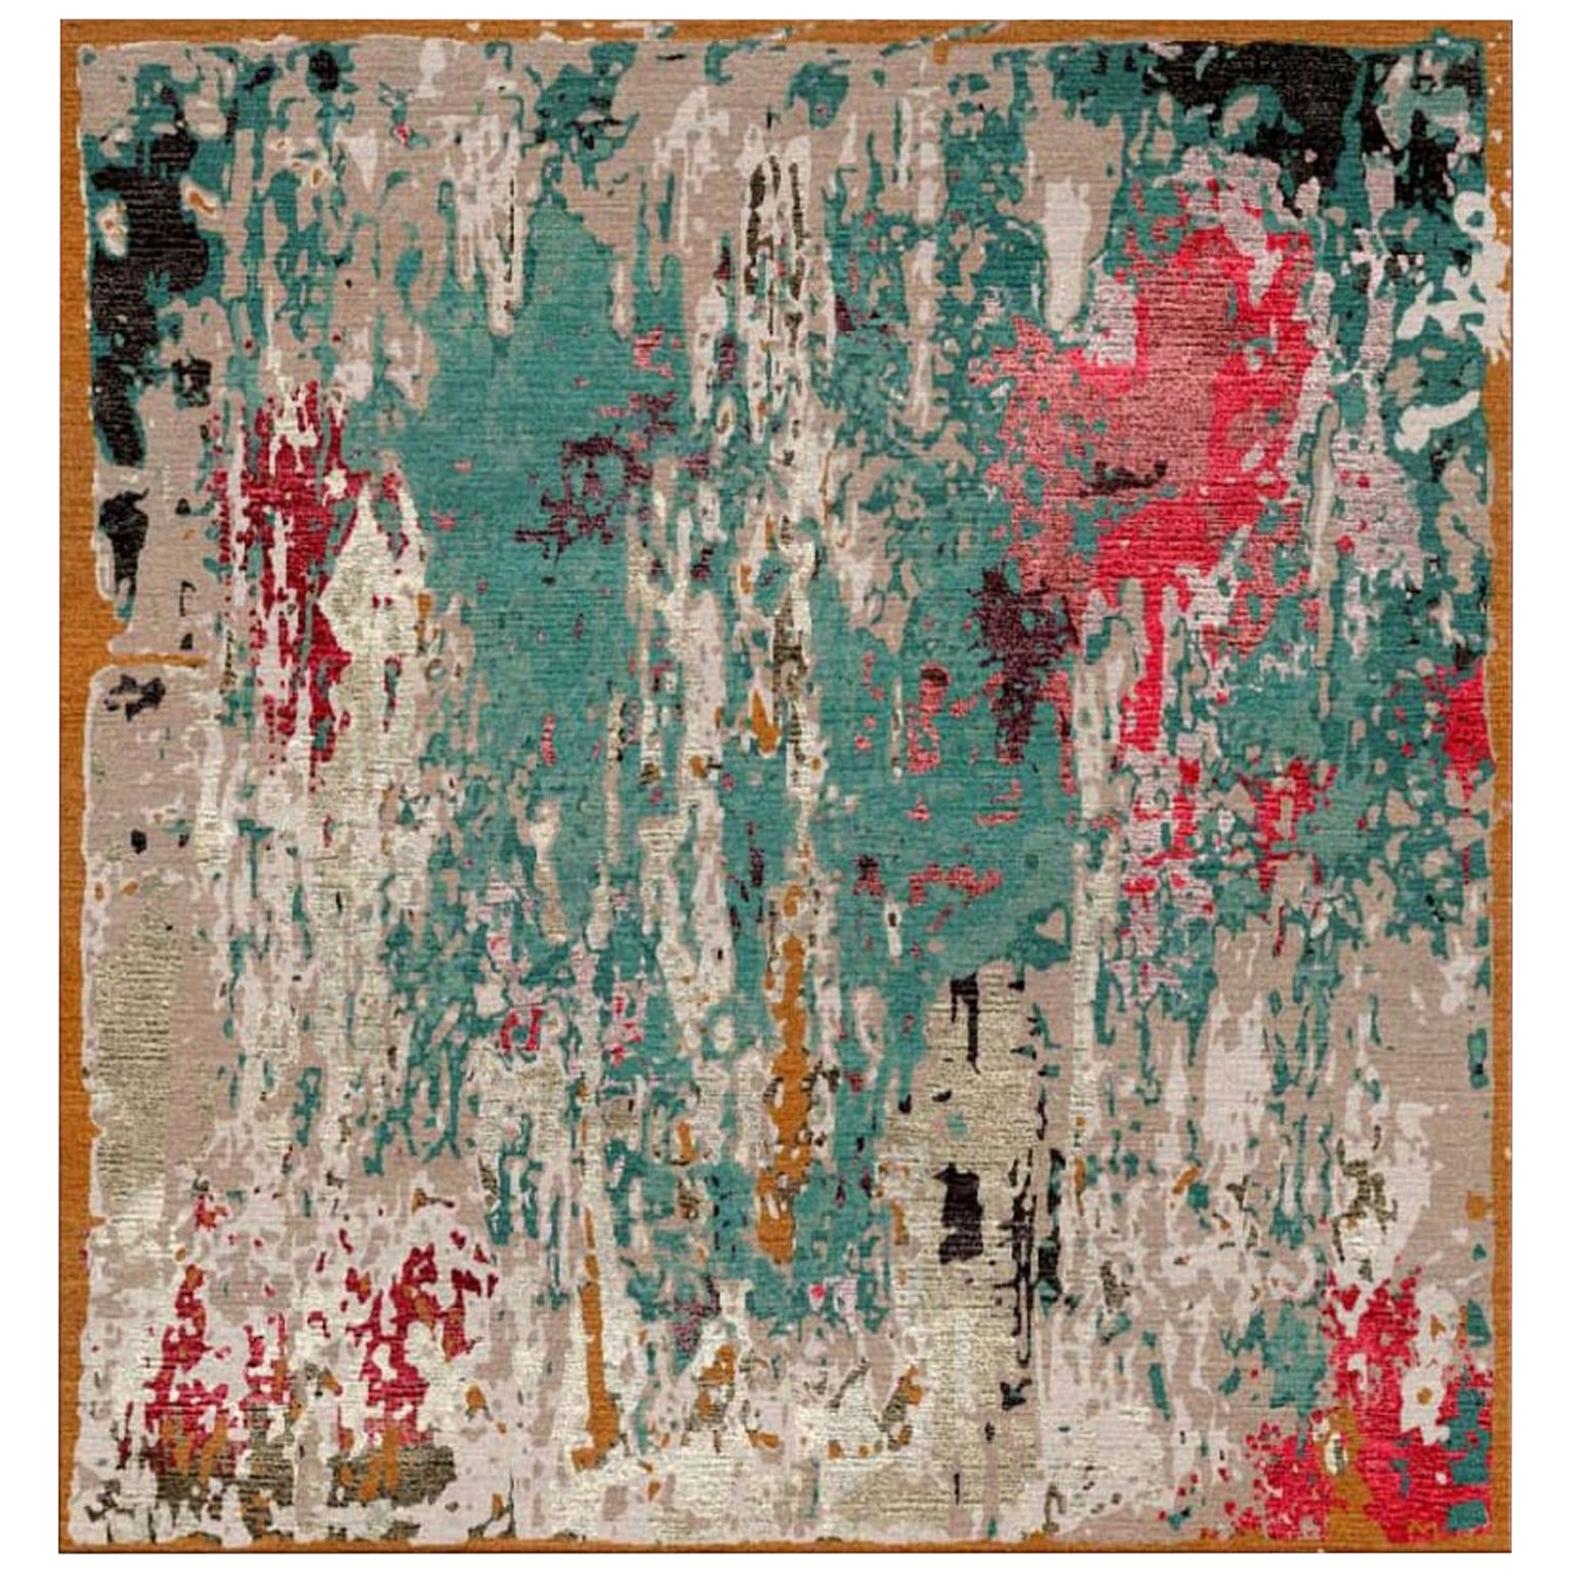 Abstract Modern Rug Wool and Silk Design 7 x 7 ft